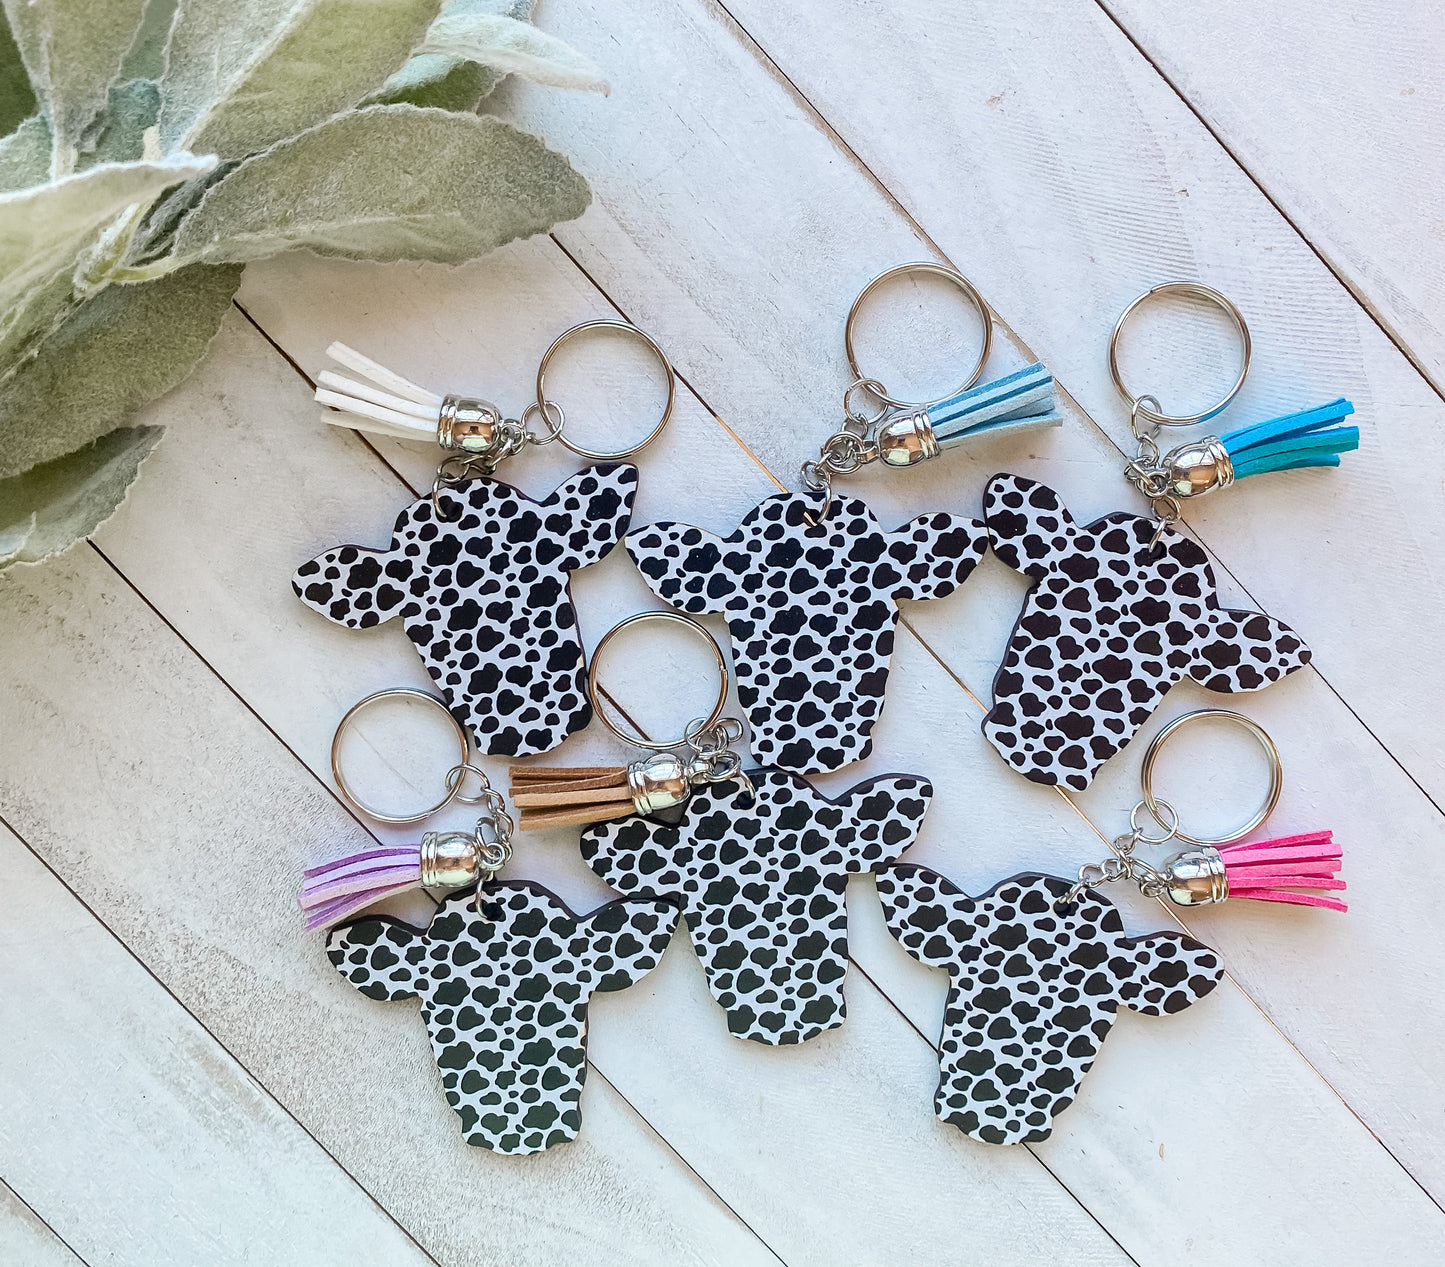 Black and white cow print keychain